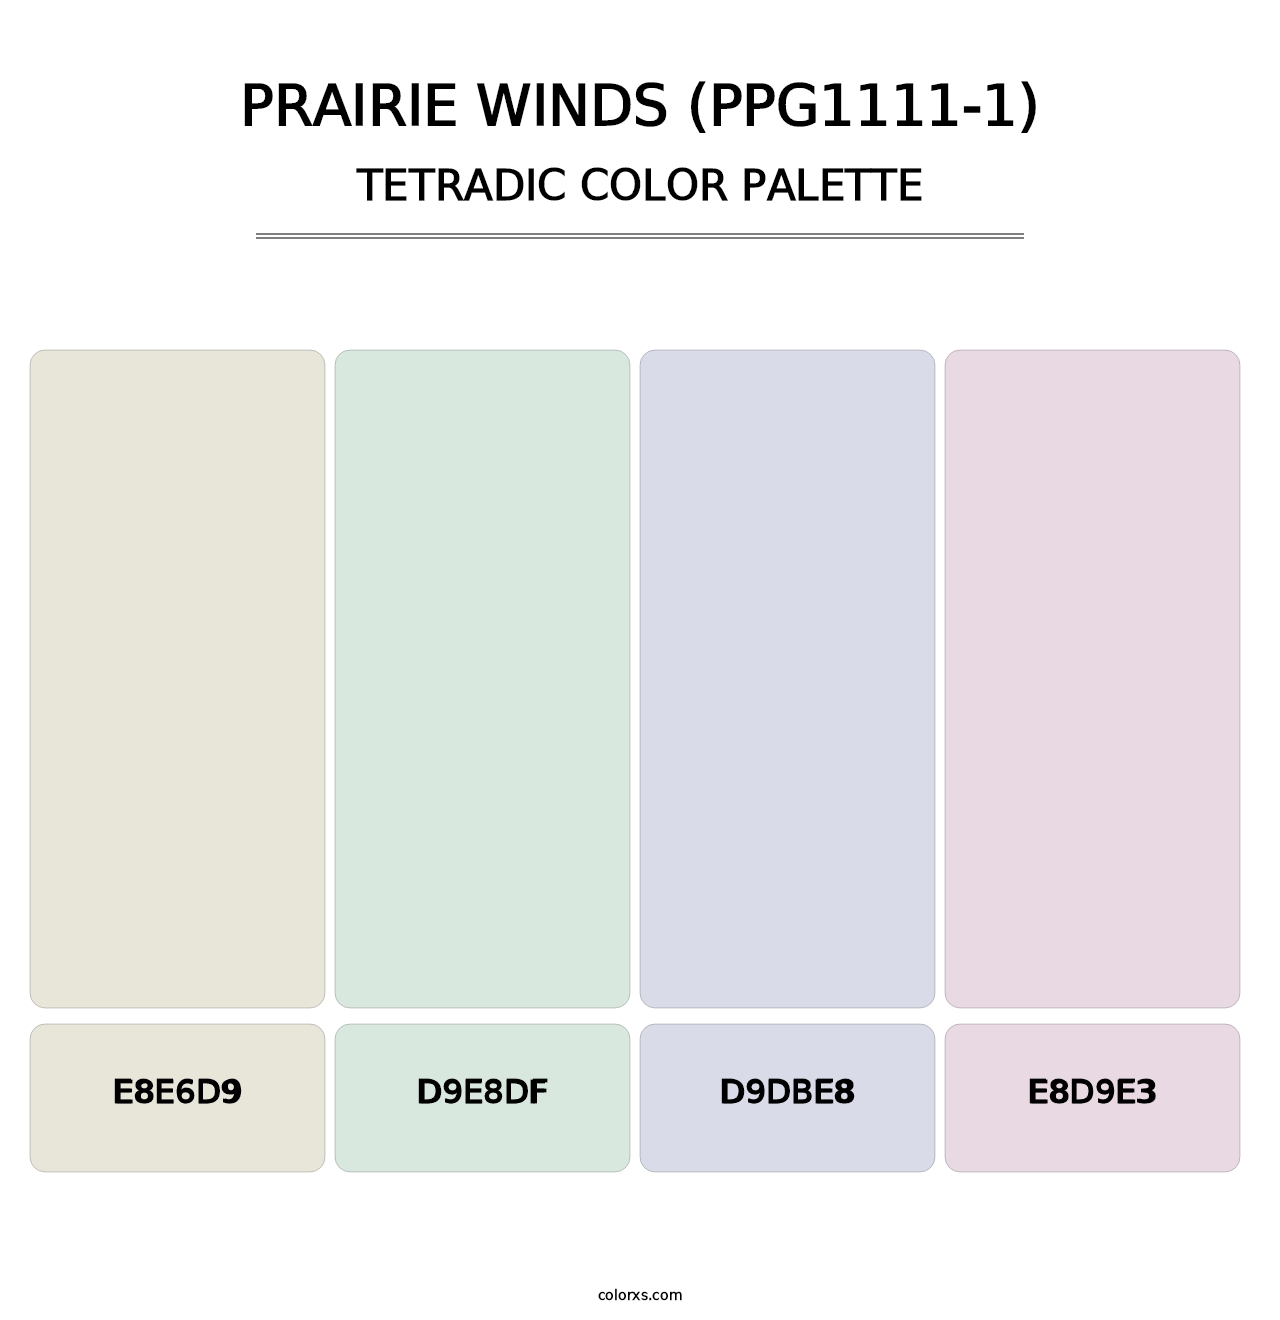 Prairie Winds (PPG1111-1) - Tetradic Color Palette